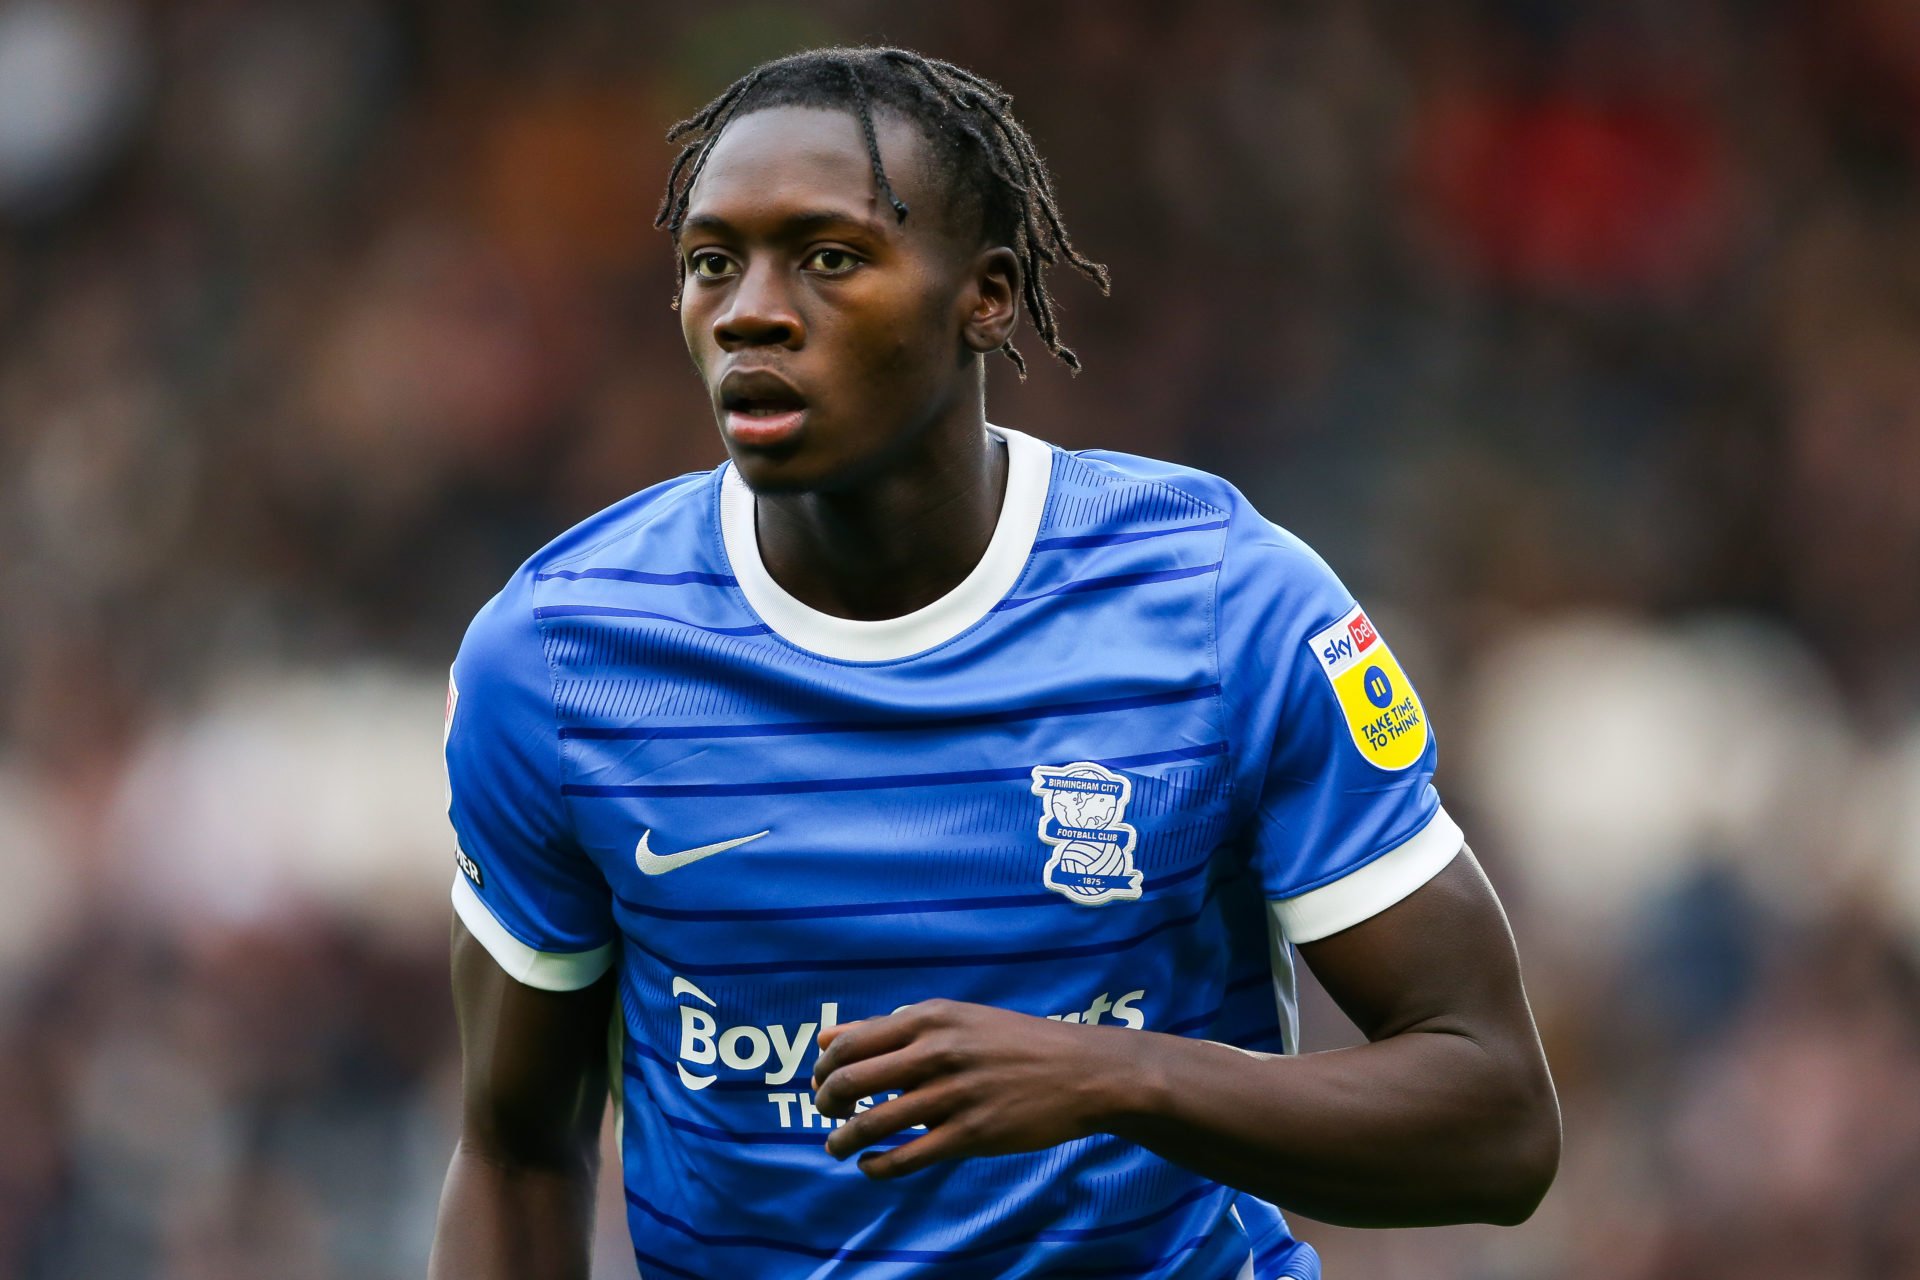 Video: Long lost loanee fires reminder to West Ham with beauty for Brum